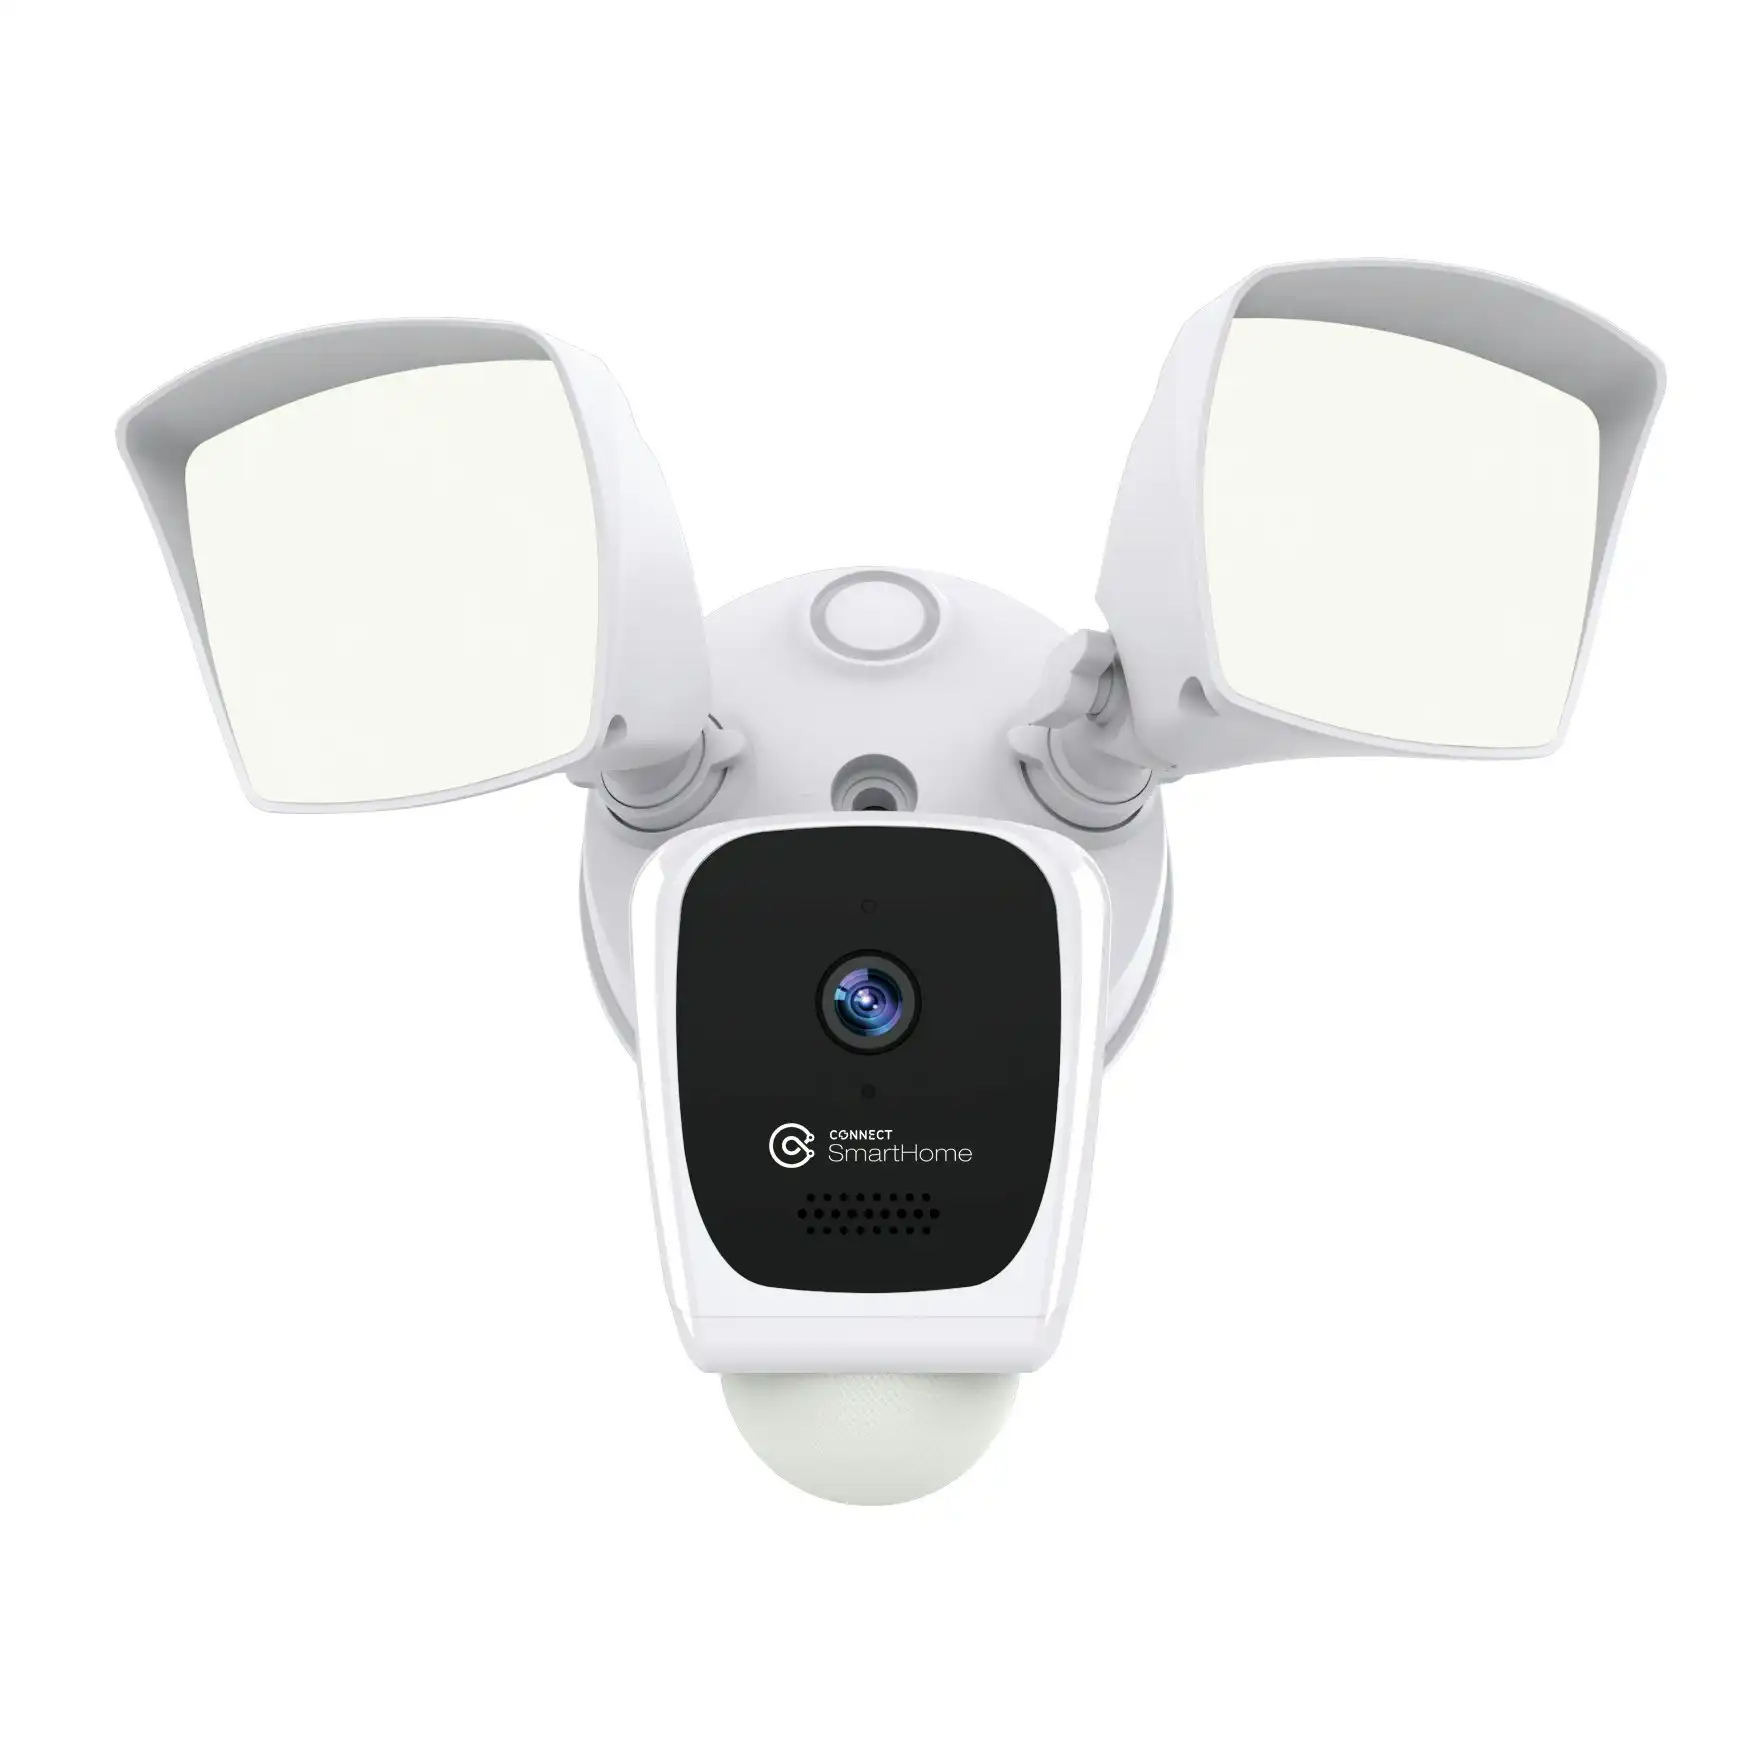 Laser Outdoor Smart Floodlight Camera - Security Solution with Smart Features